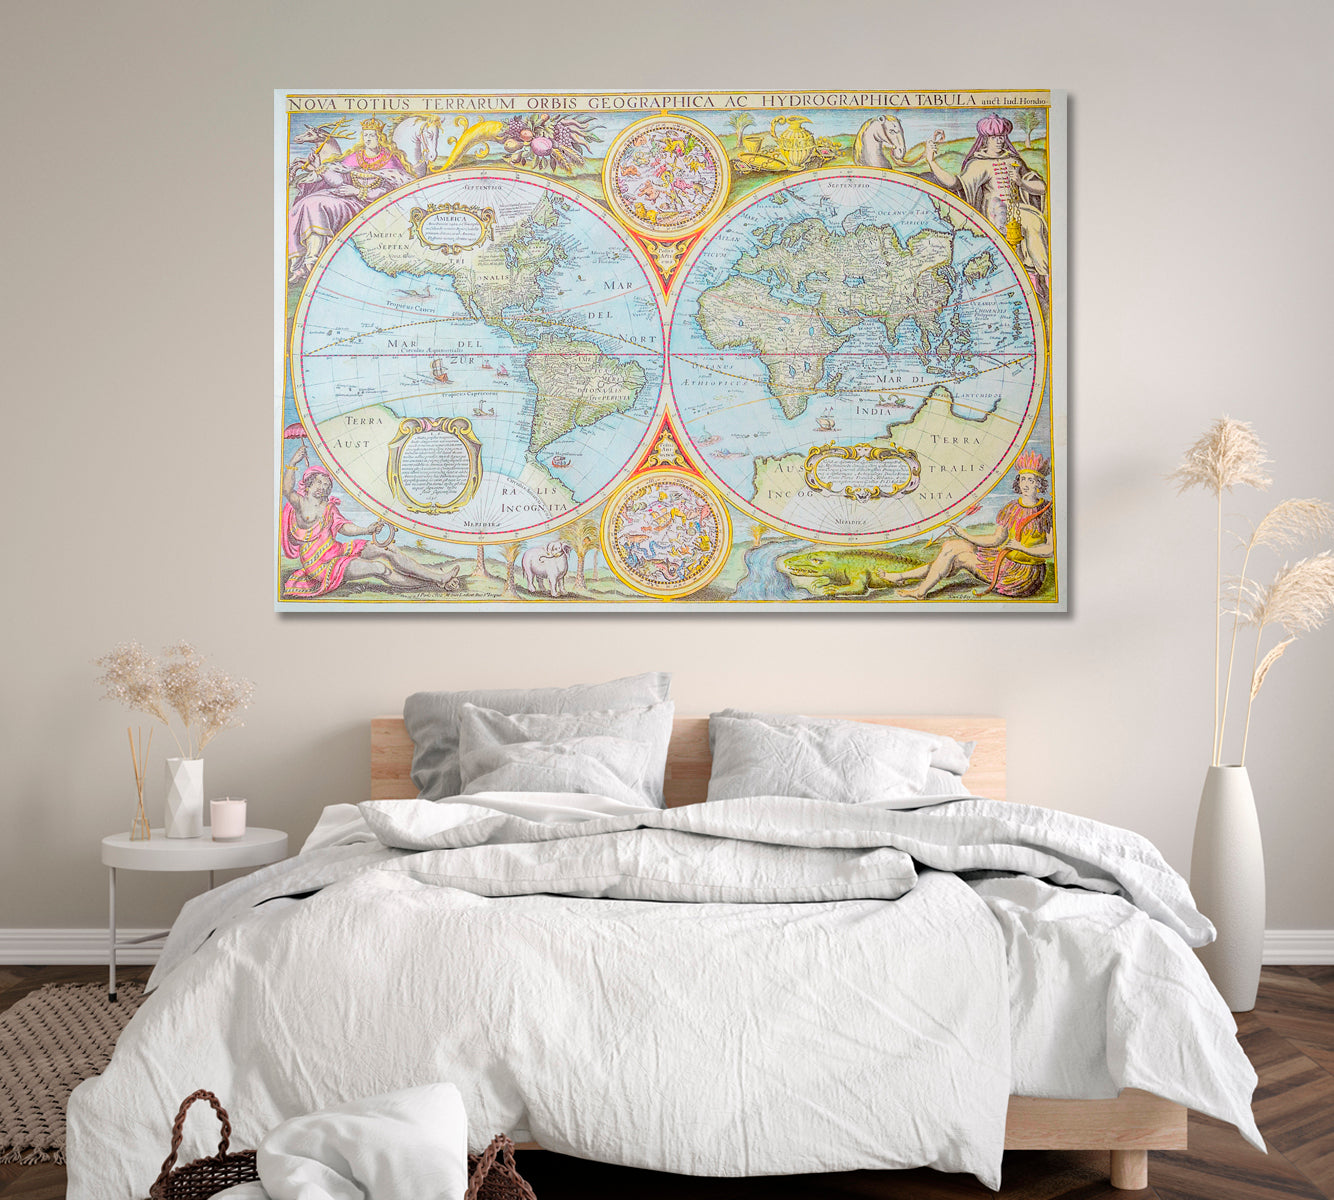 Old Colorful Map Canvas Print ArtLexy 1 Panel 24"x16" inches 